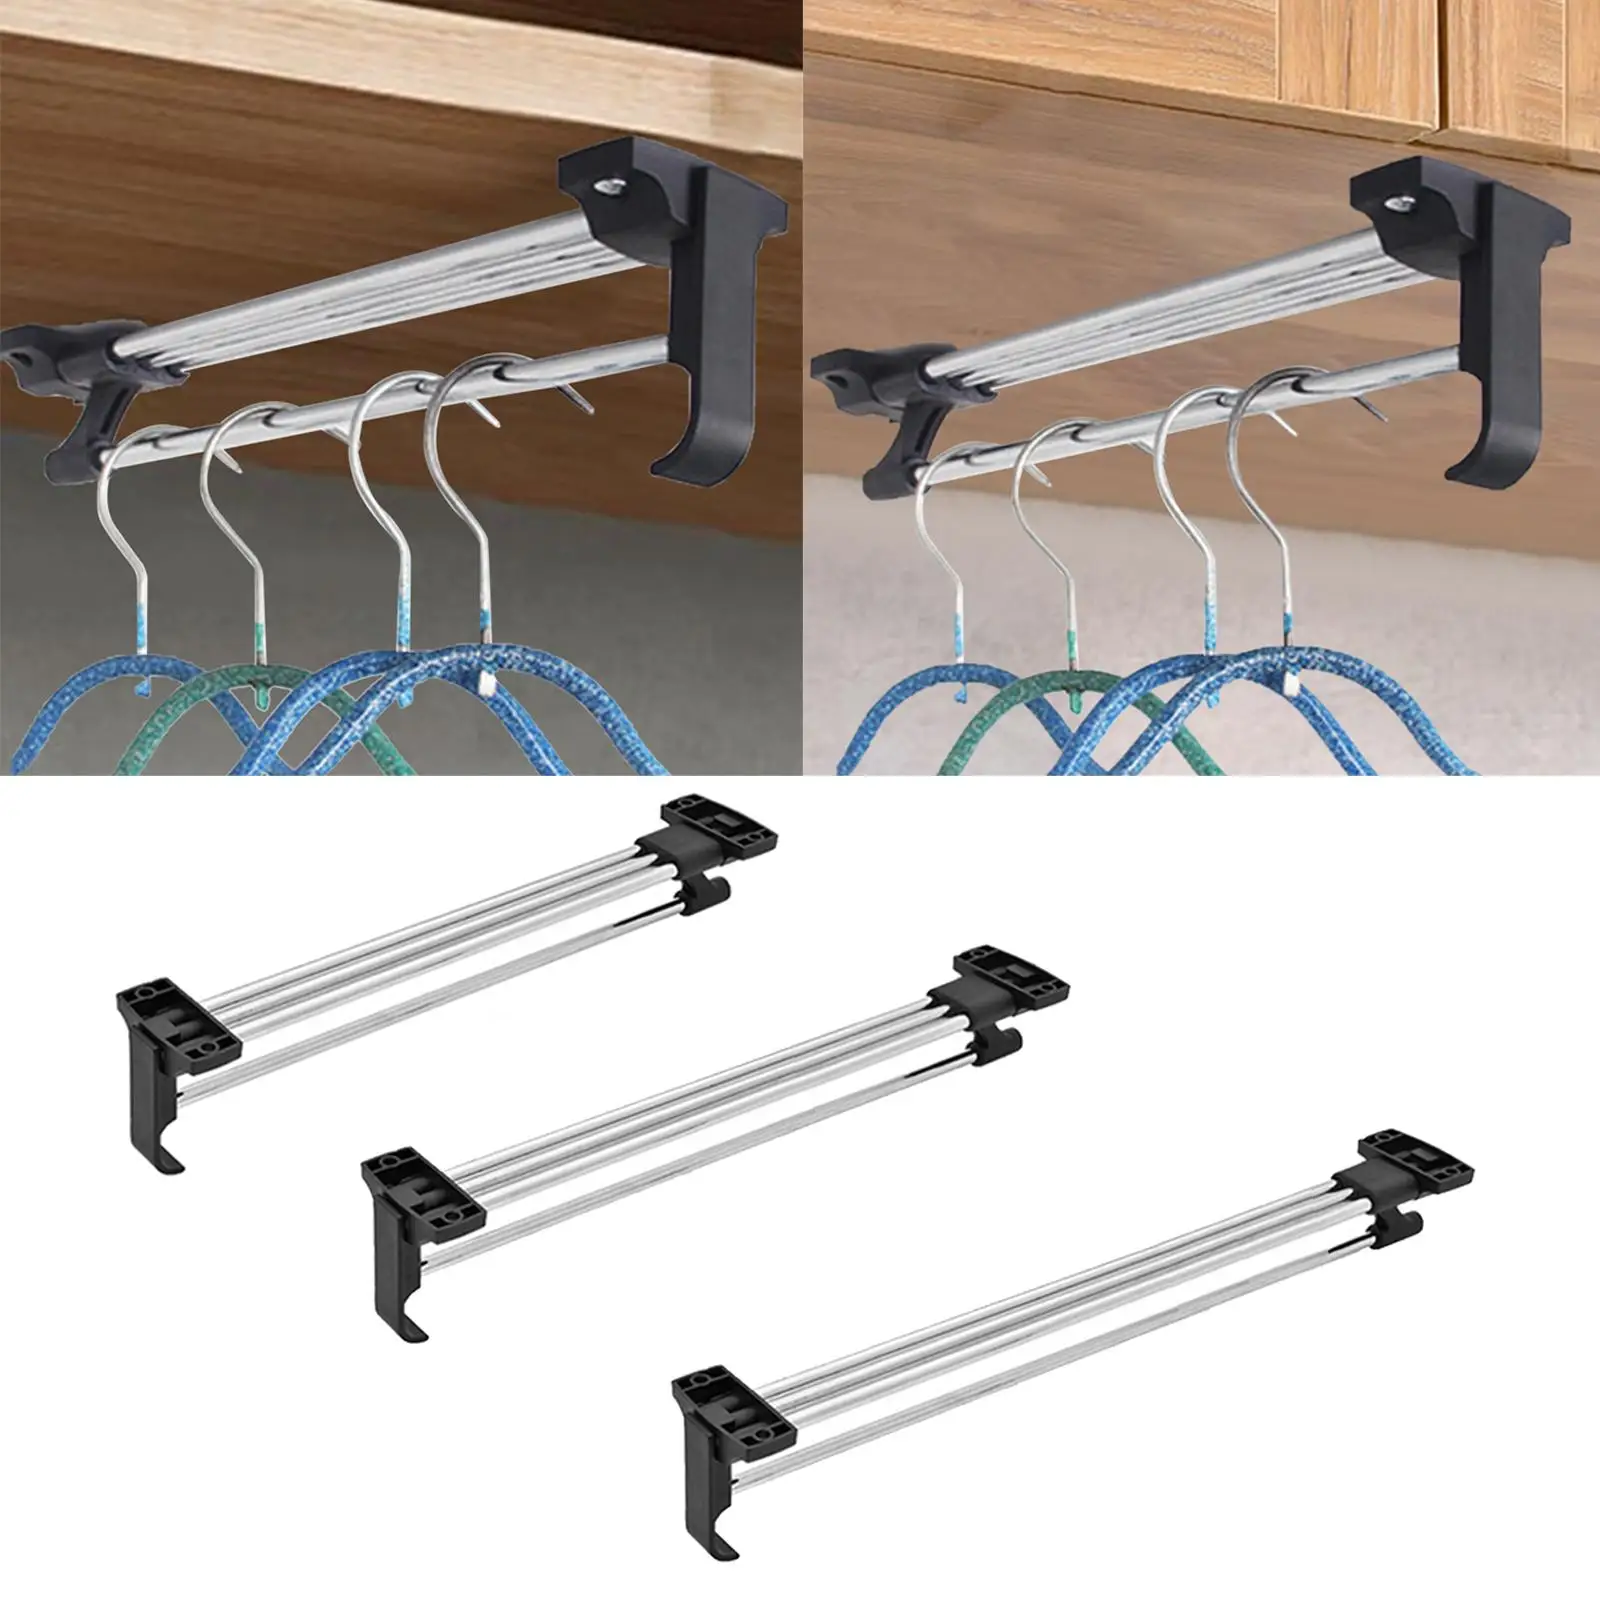 Multipurpose Clothing Hanger Telescopic Rod Clothes Hanger Clothes Drying Rack for Scarf